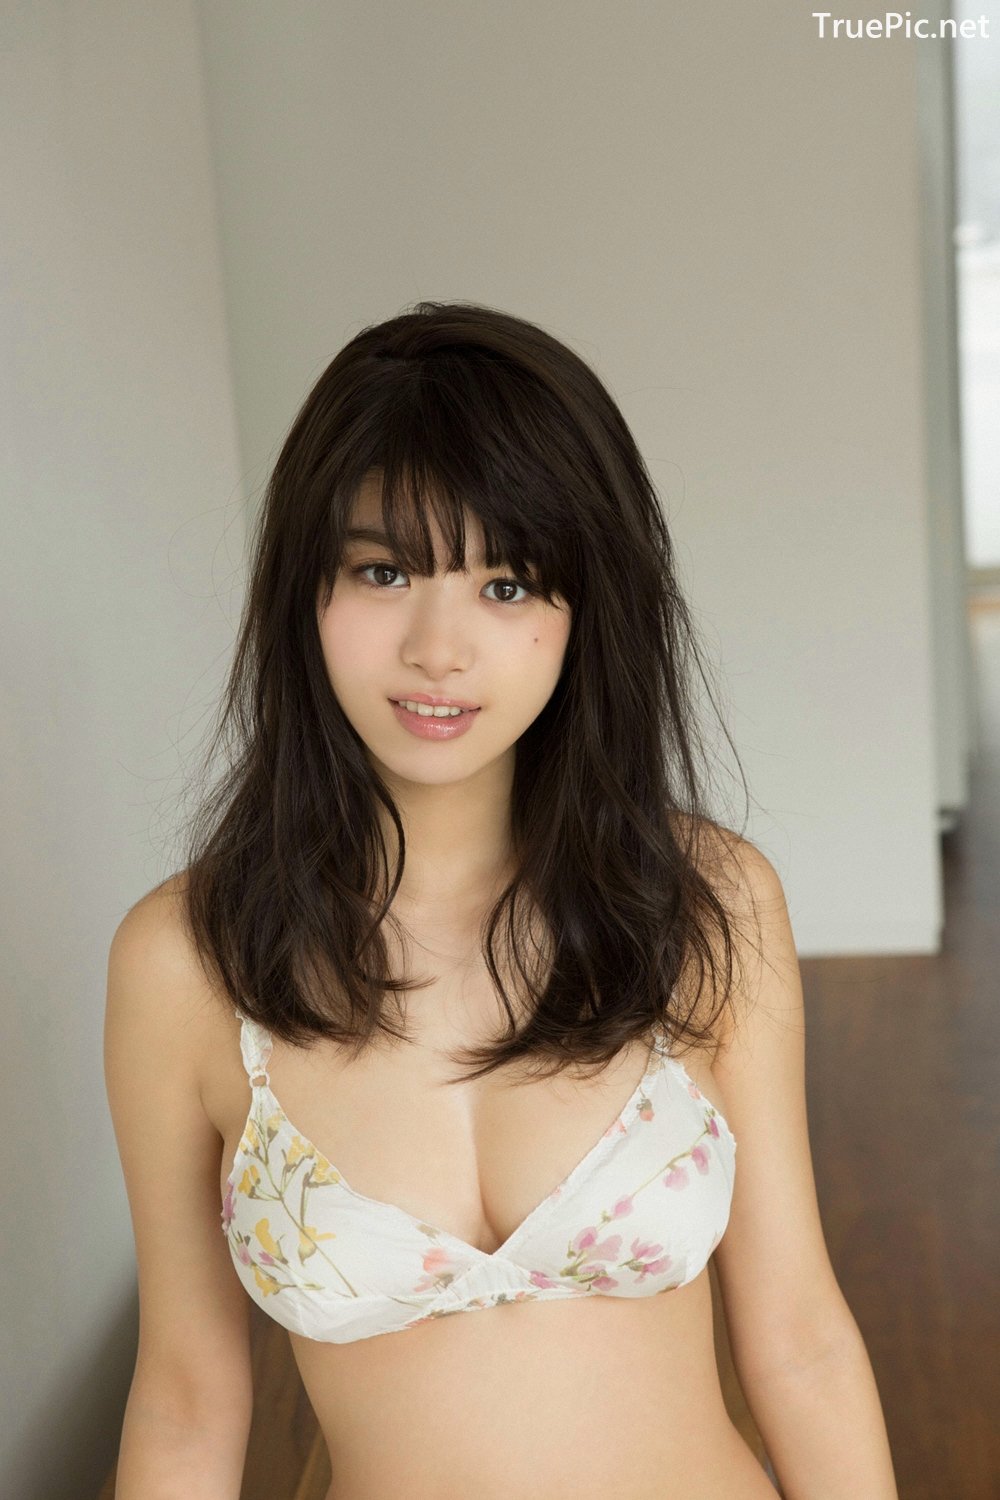 Japanese Actress And Model - Fumika Baba - YS Web Vol.729 - TruePic.net - Picture-92